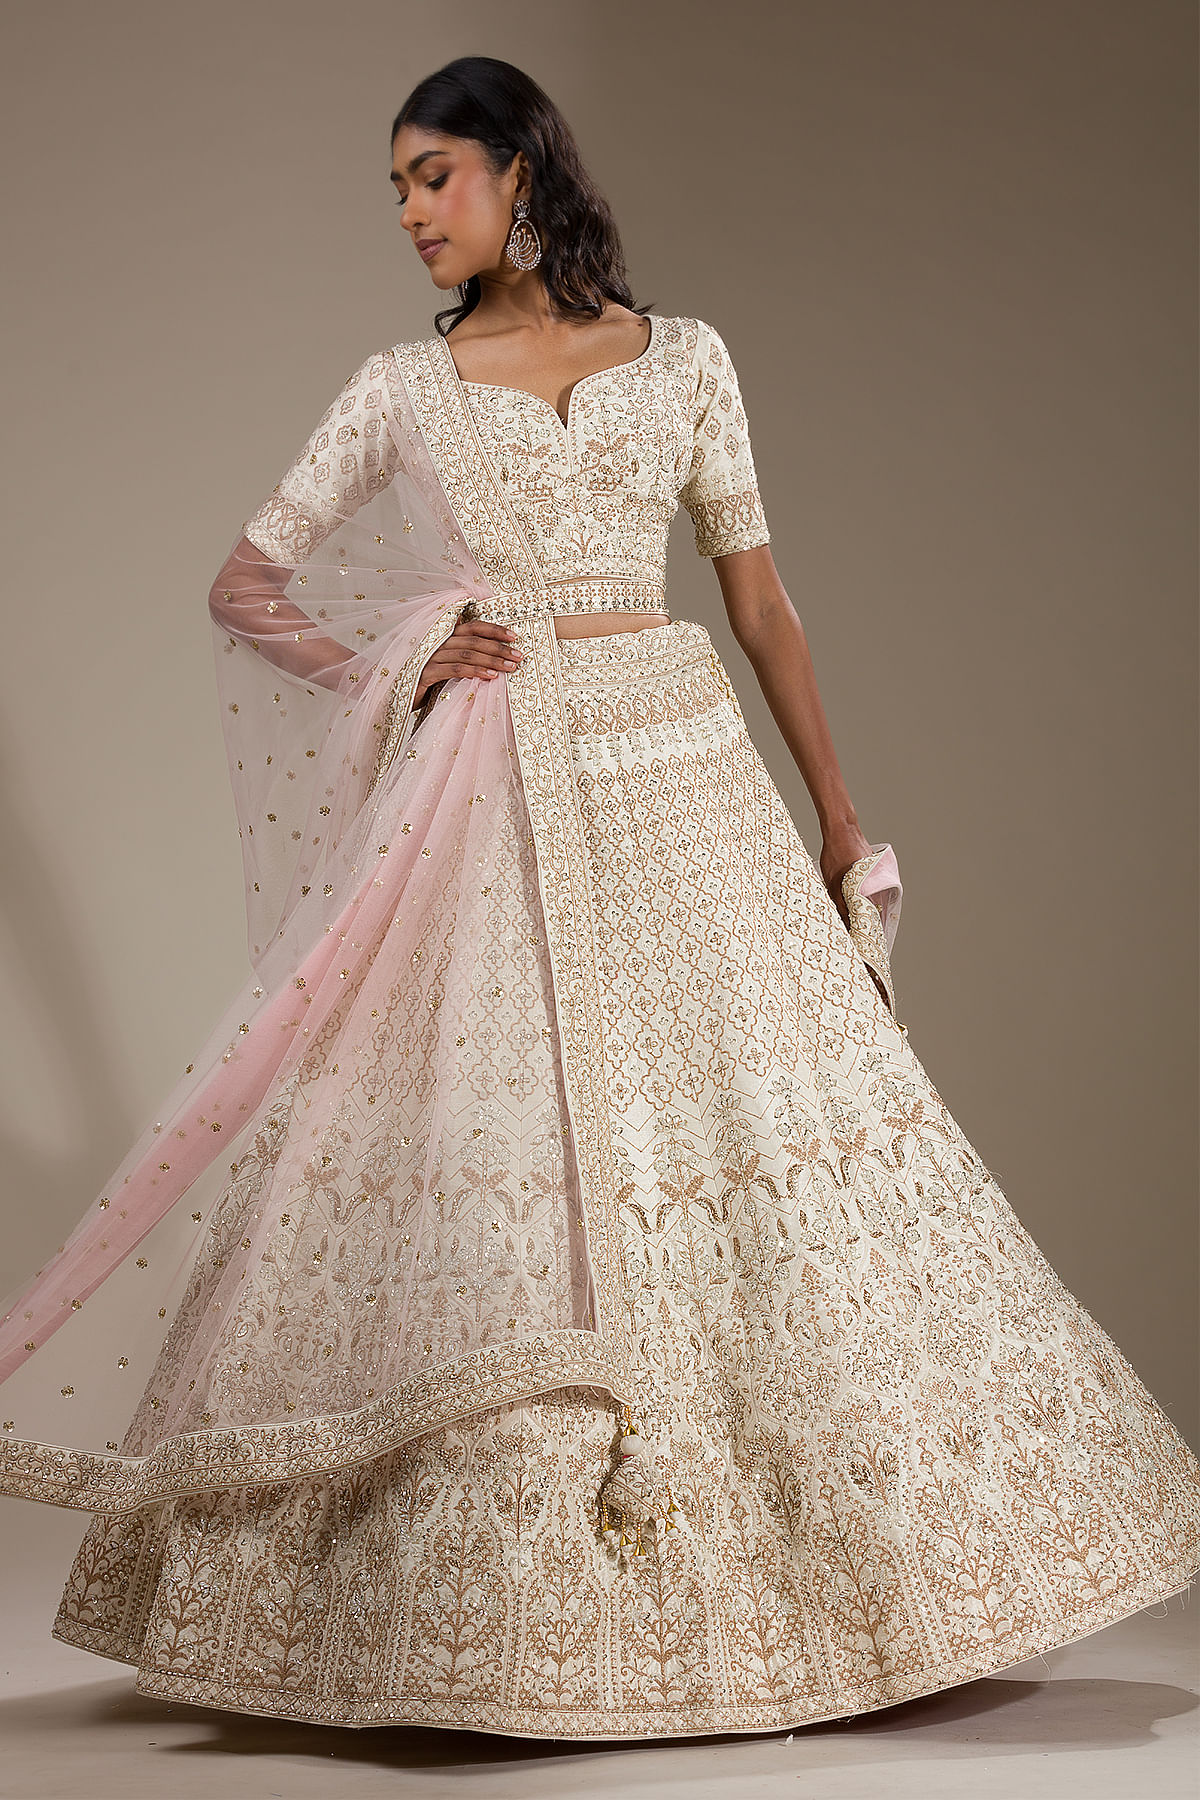 Ivory Sequence Lehenga With Pineapple Yellow Mirrorwork Blouse